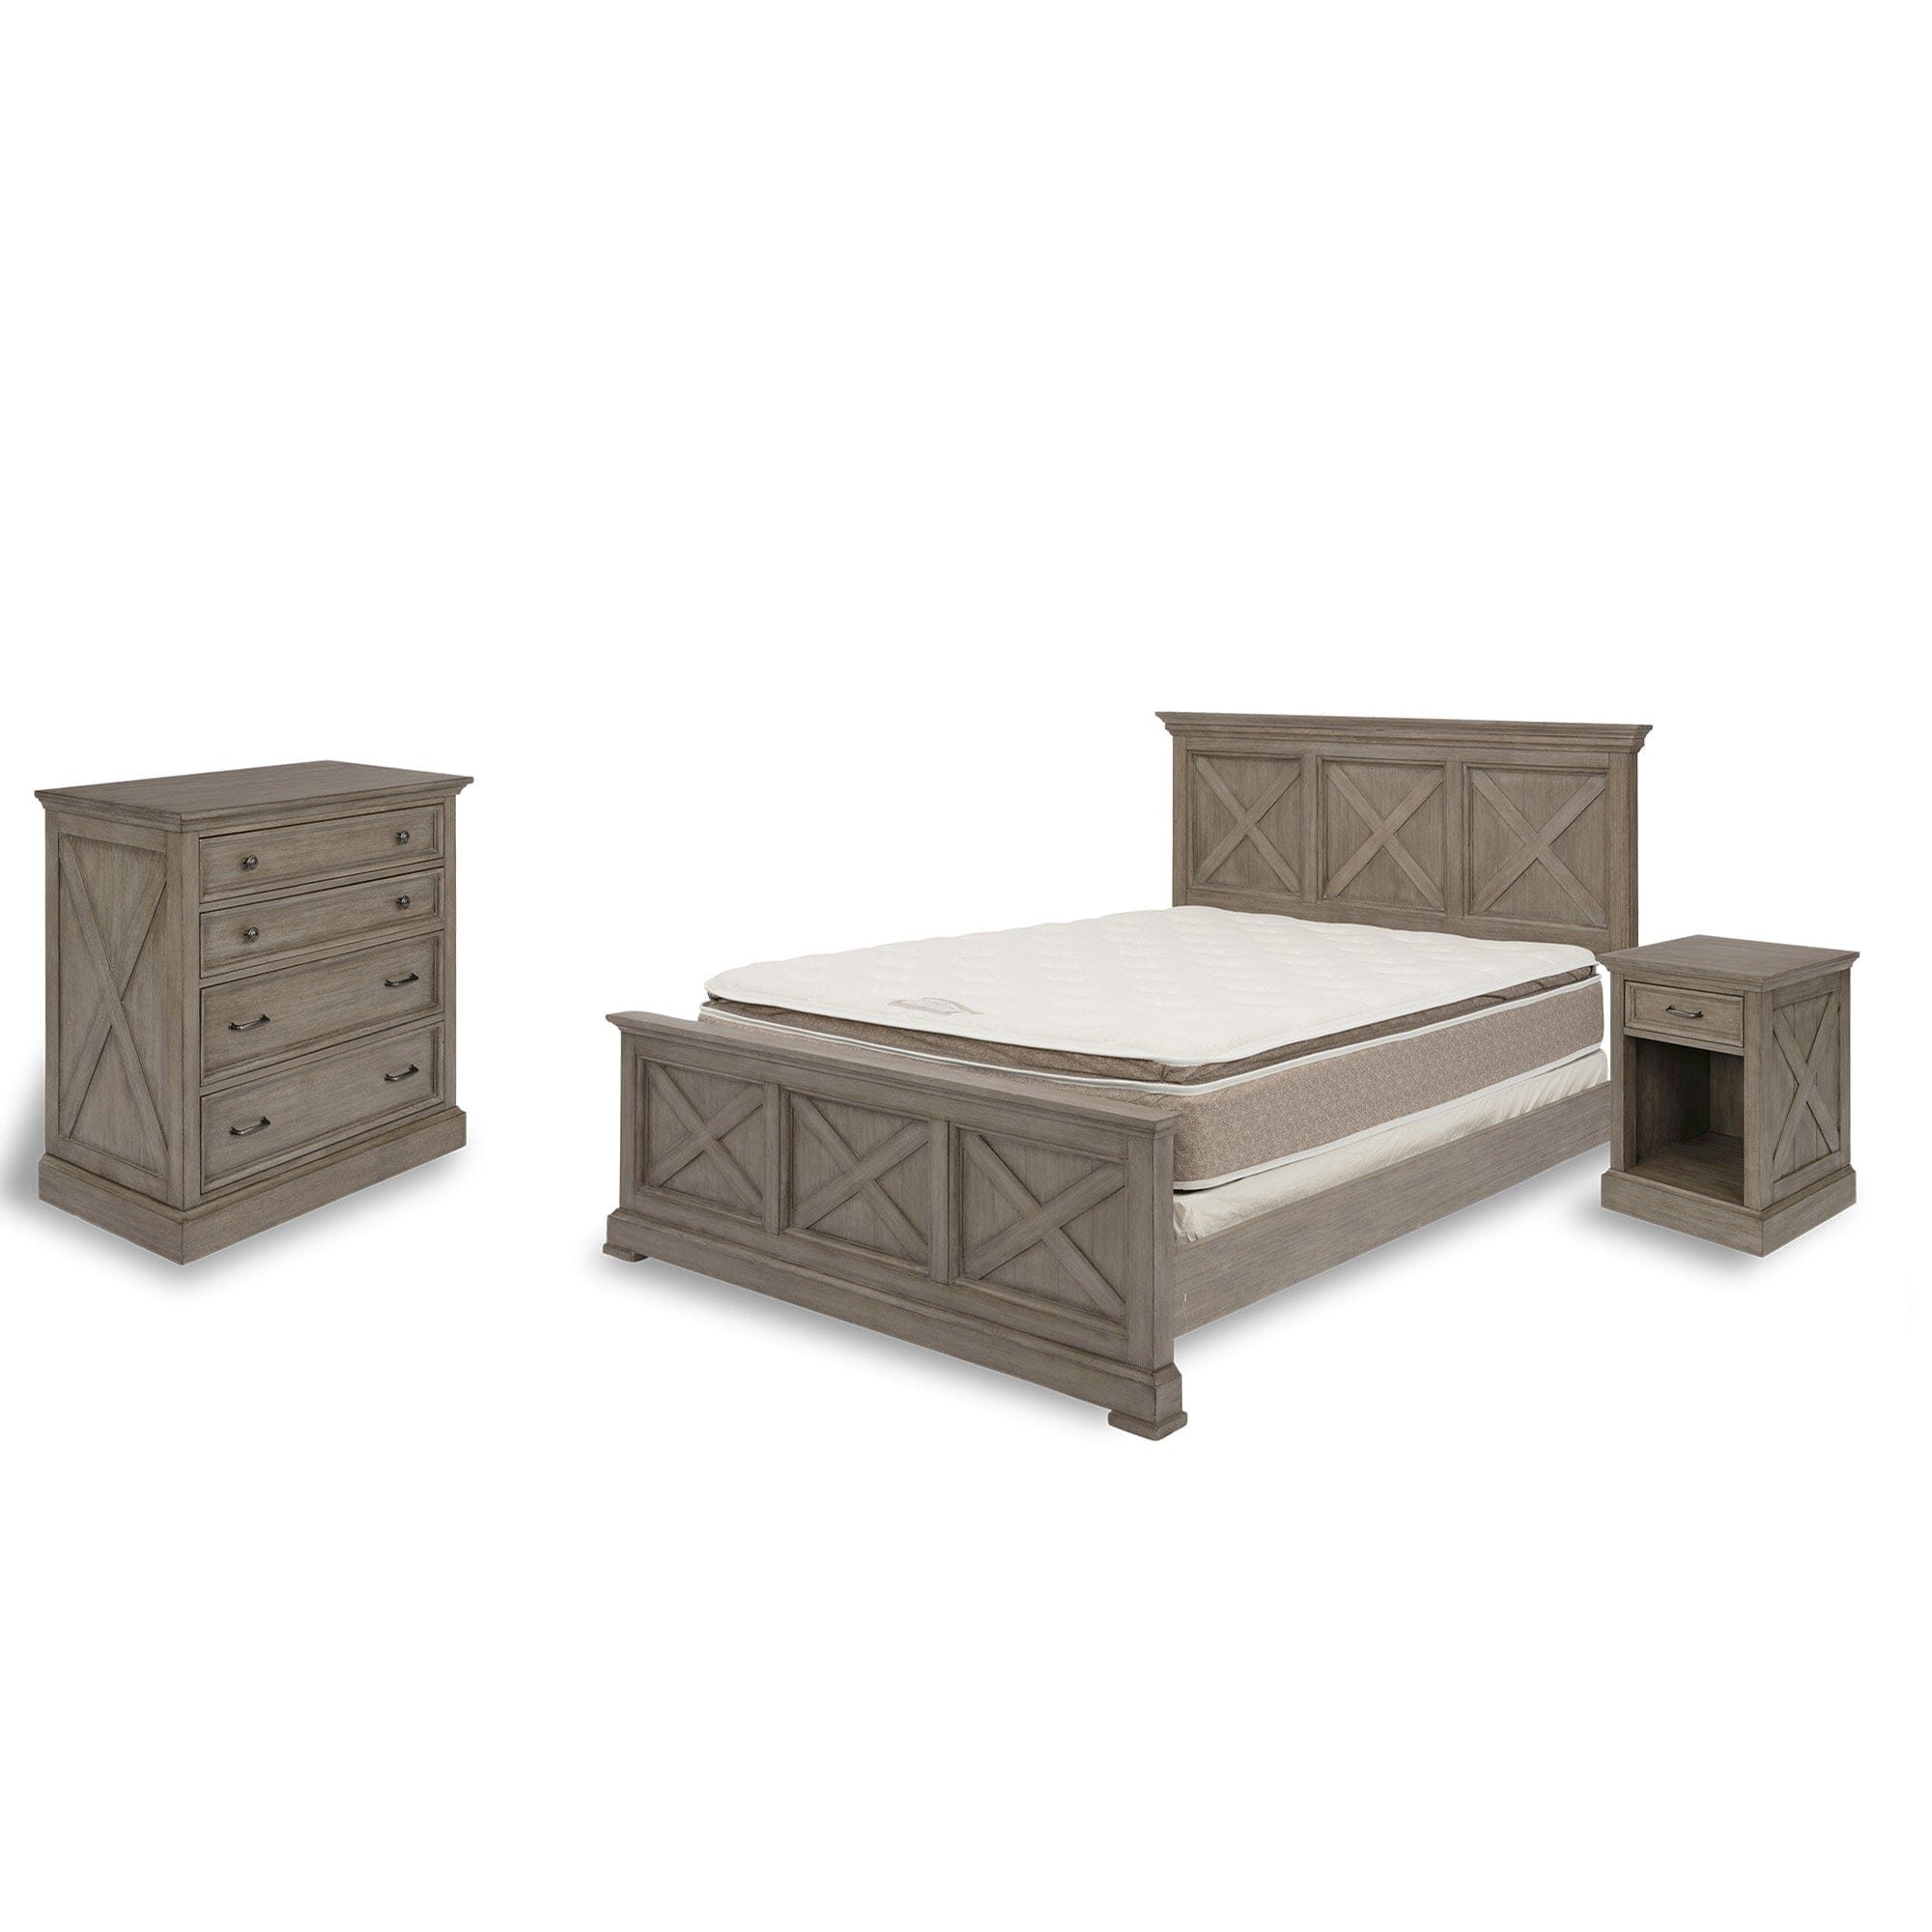 Rustic Farmhouse Queen Bed, Nightstand and Chest By Mountain Lodge Queen Bed Mountain Lodge